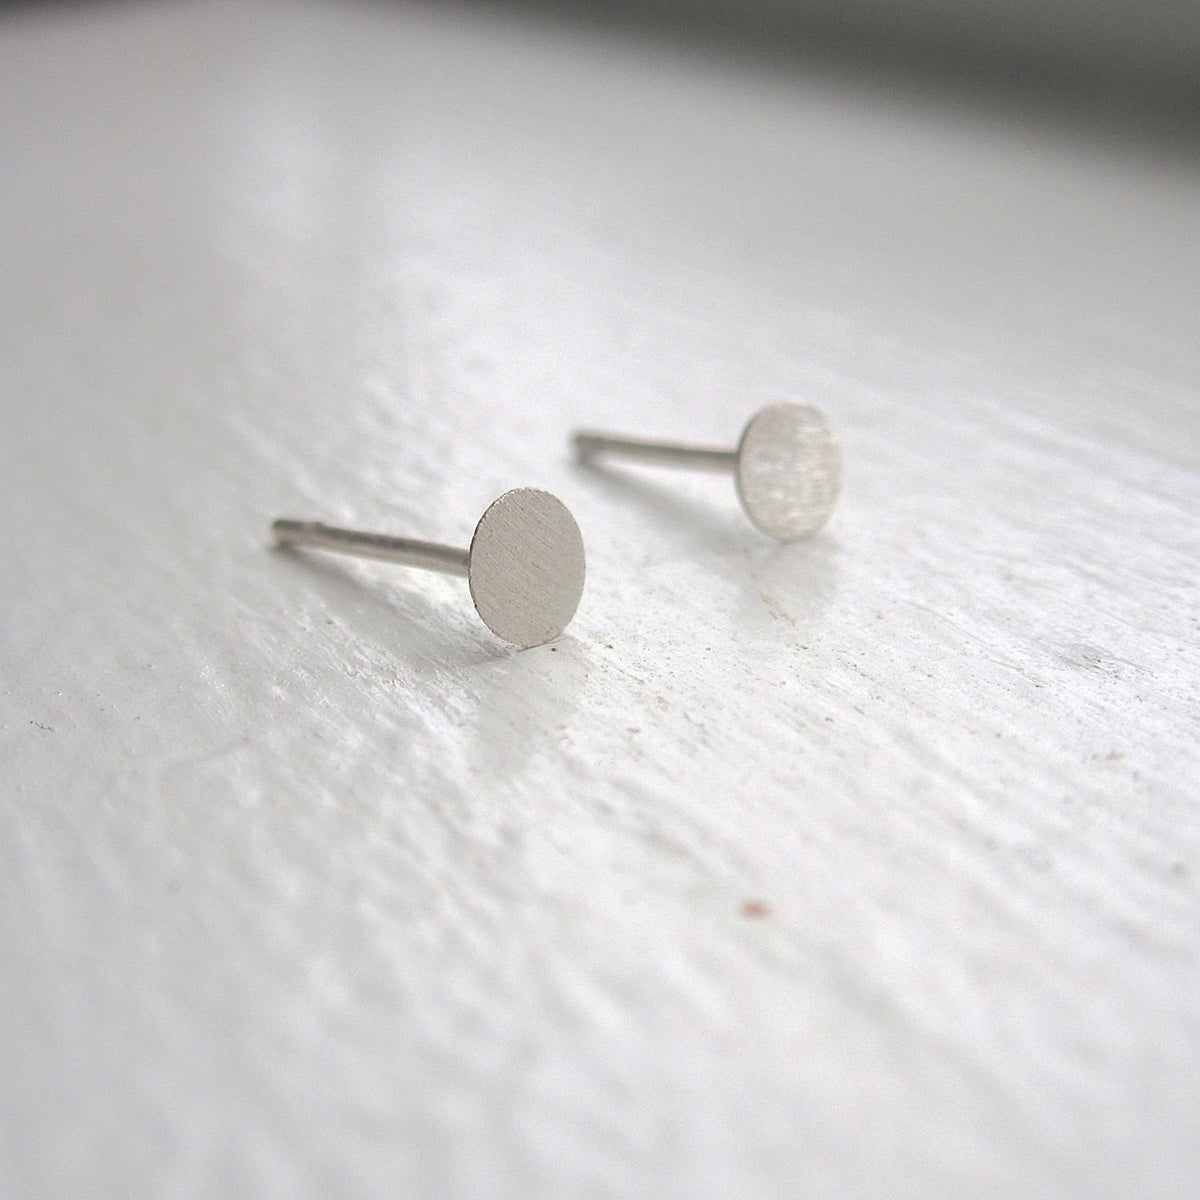 Stylish and Understated - Circular Flat Sterling Silver or Brass Stud Earrings - 0123 - Virginia Wynne Designs